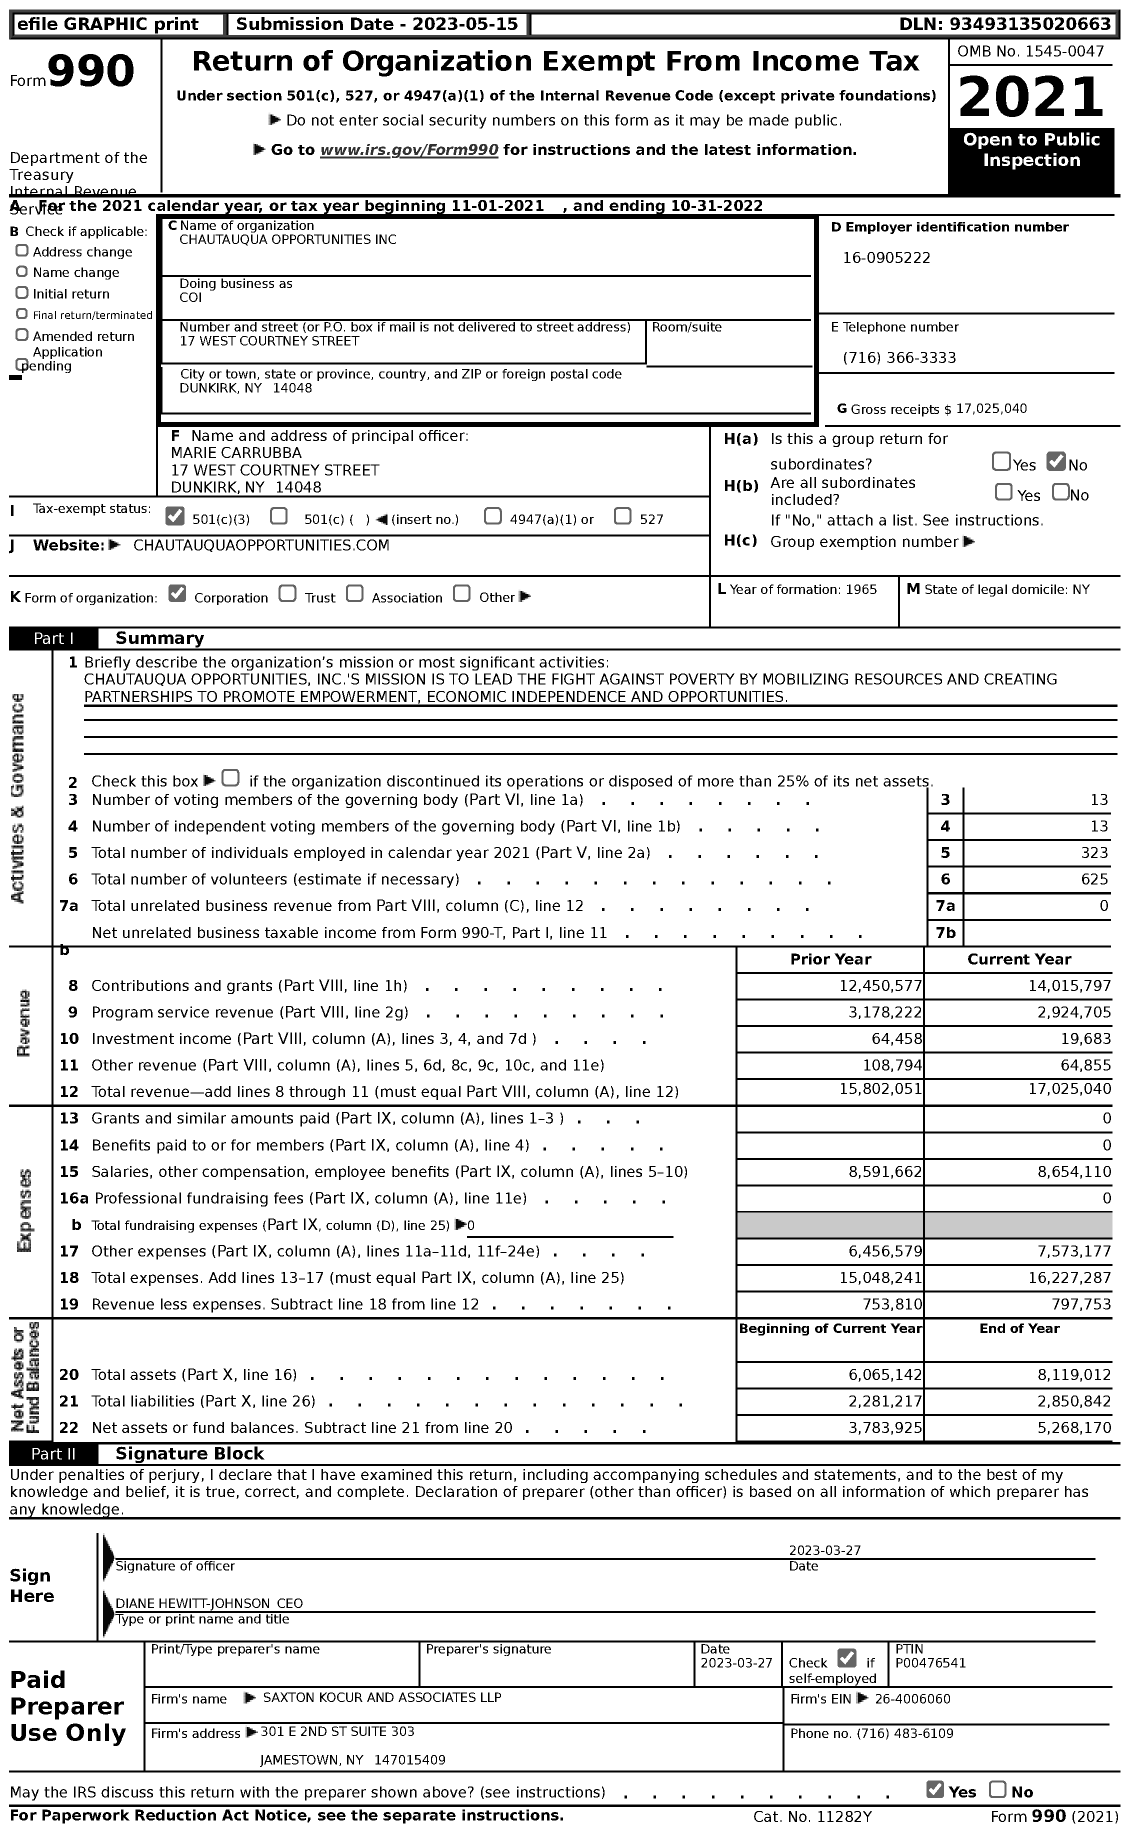 Image of first page of 2021 Form 990 for Chautauqua Opportunities Incorporation (COI)